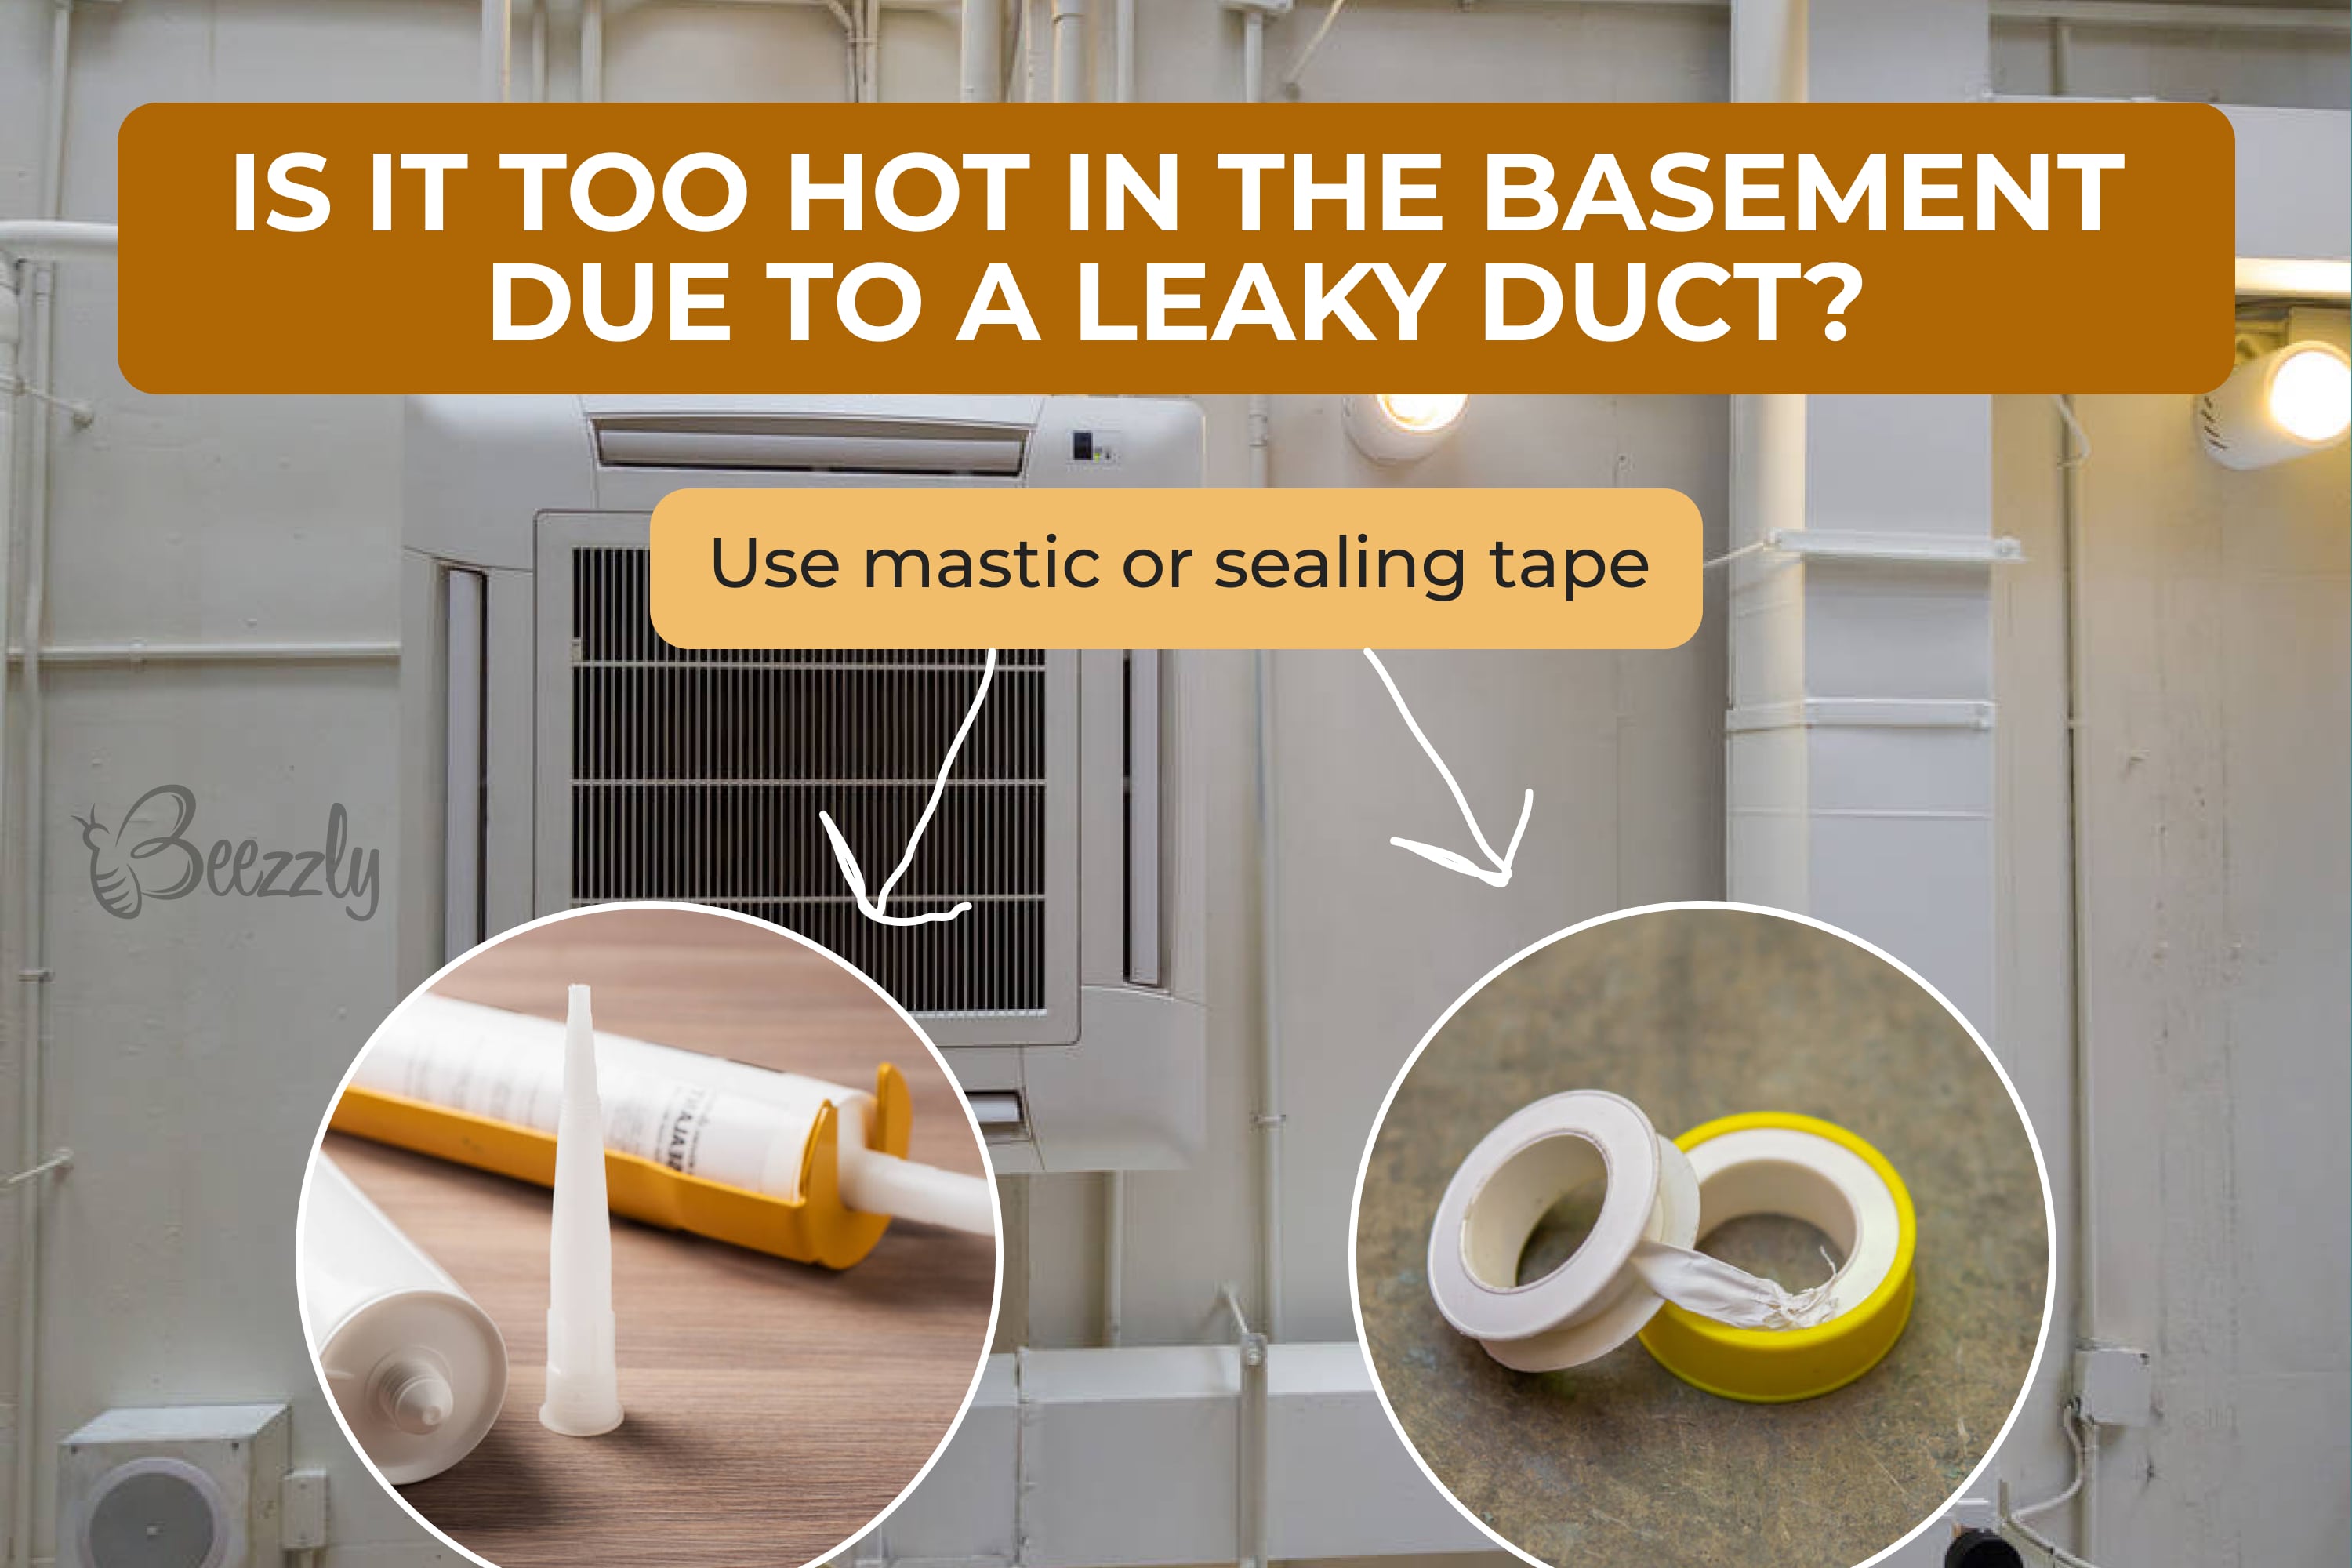 Is it too hot in the basement due to a leaky duct